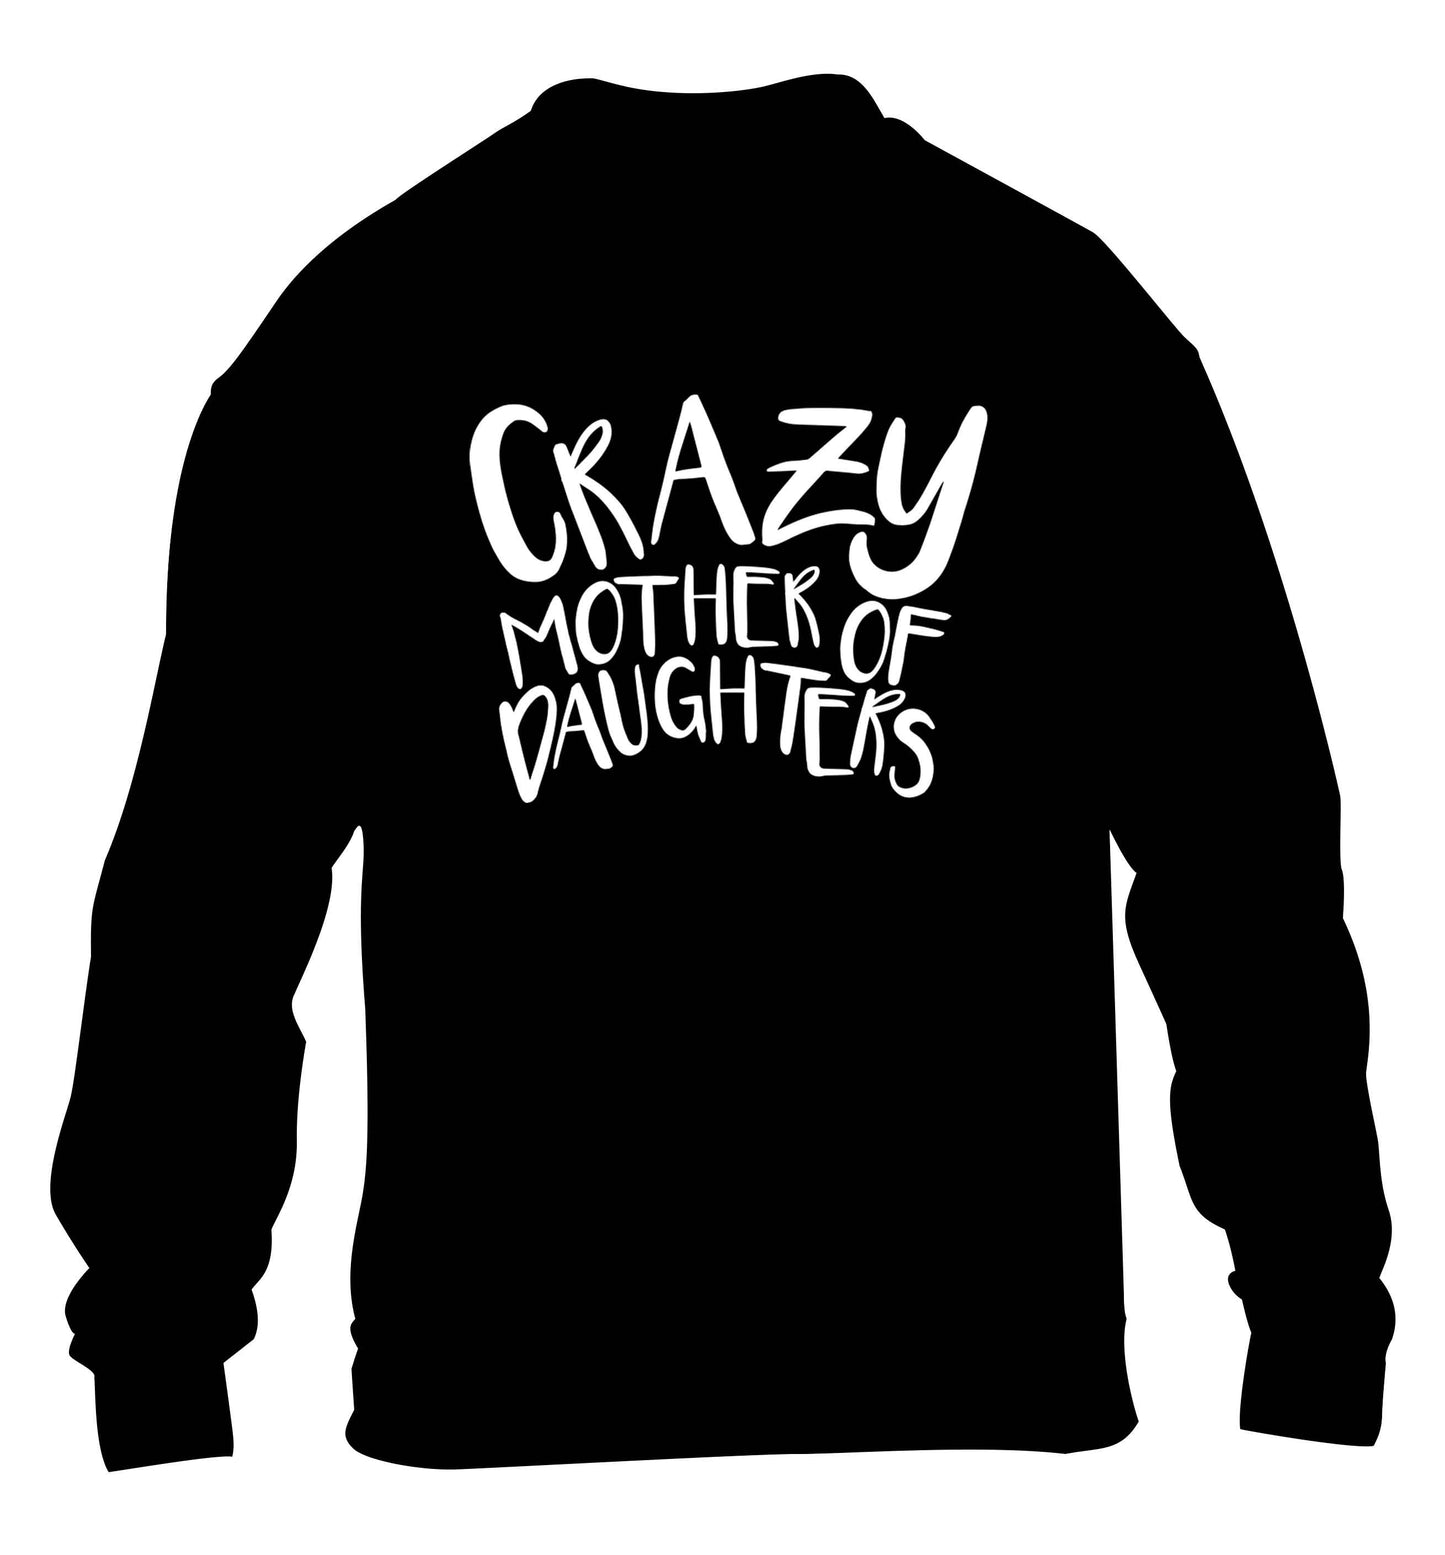 Crazy mother of daughters children's black sweater 12-13 Years